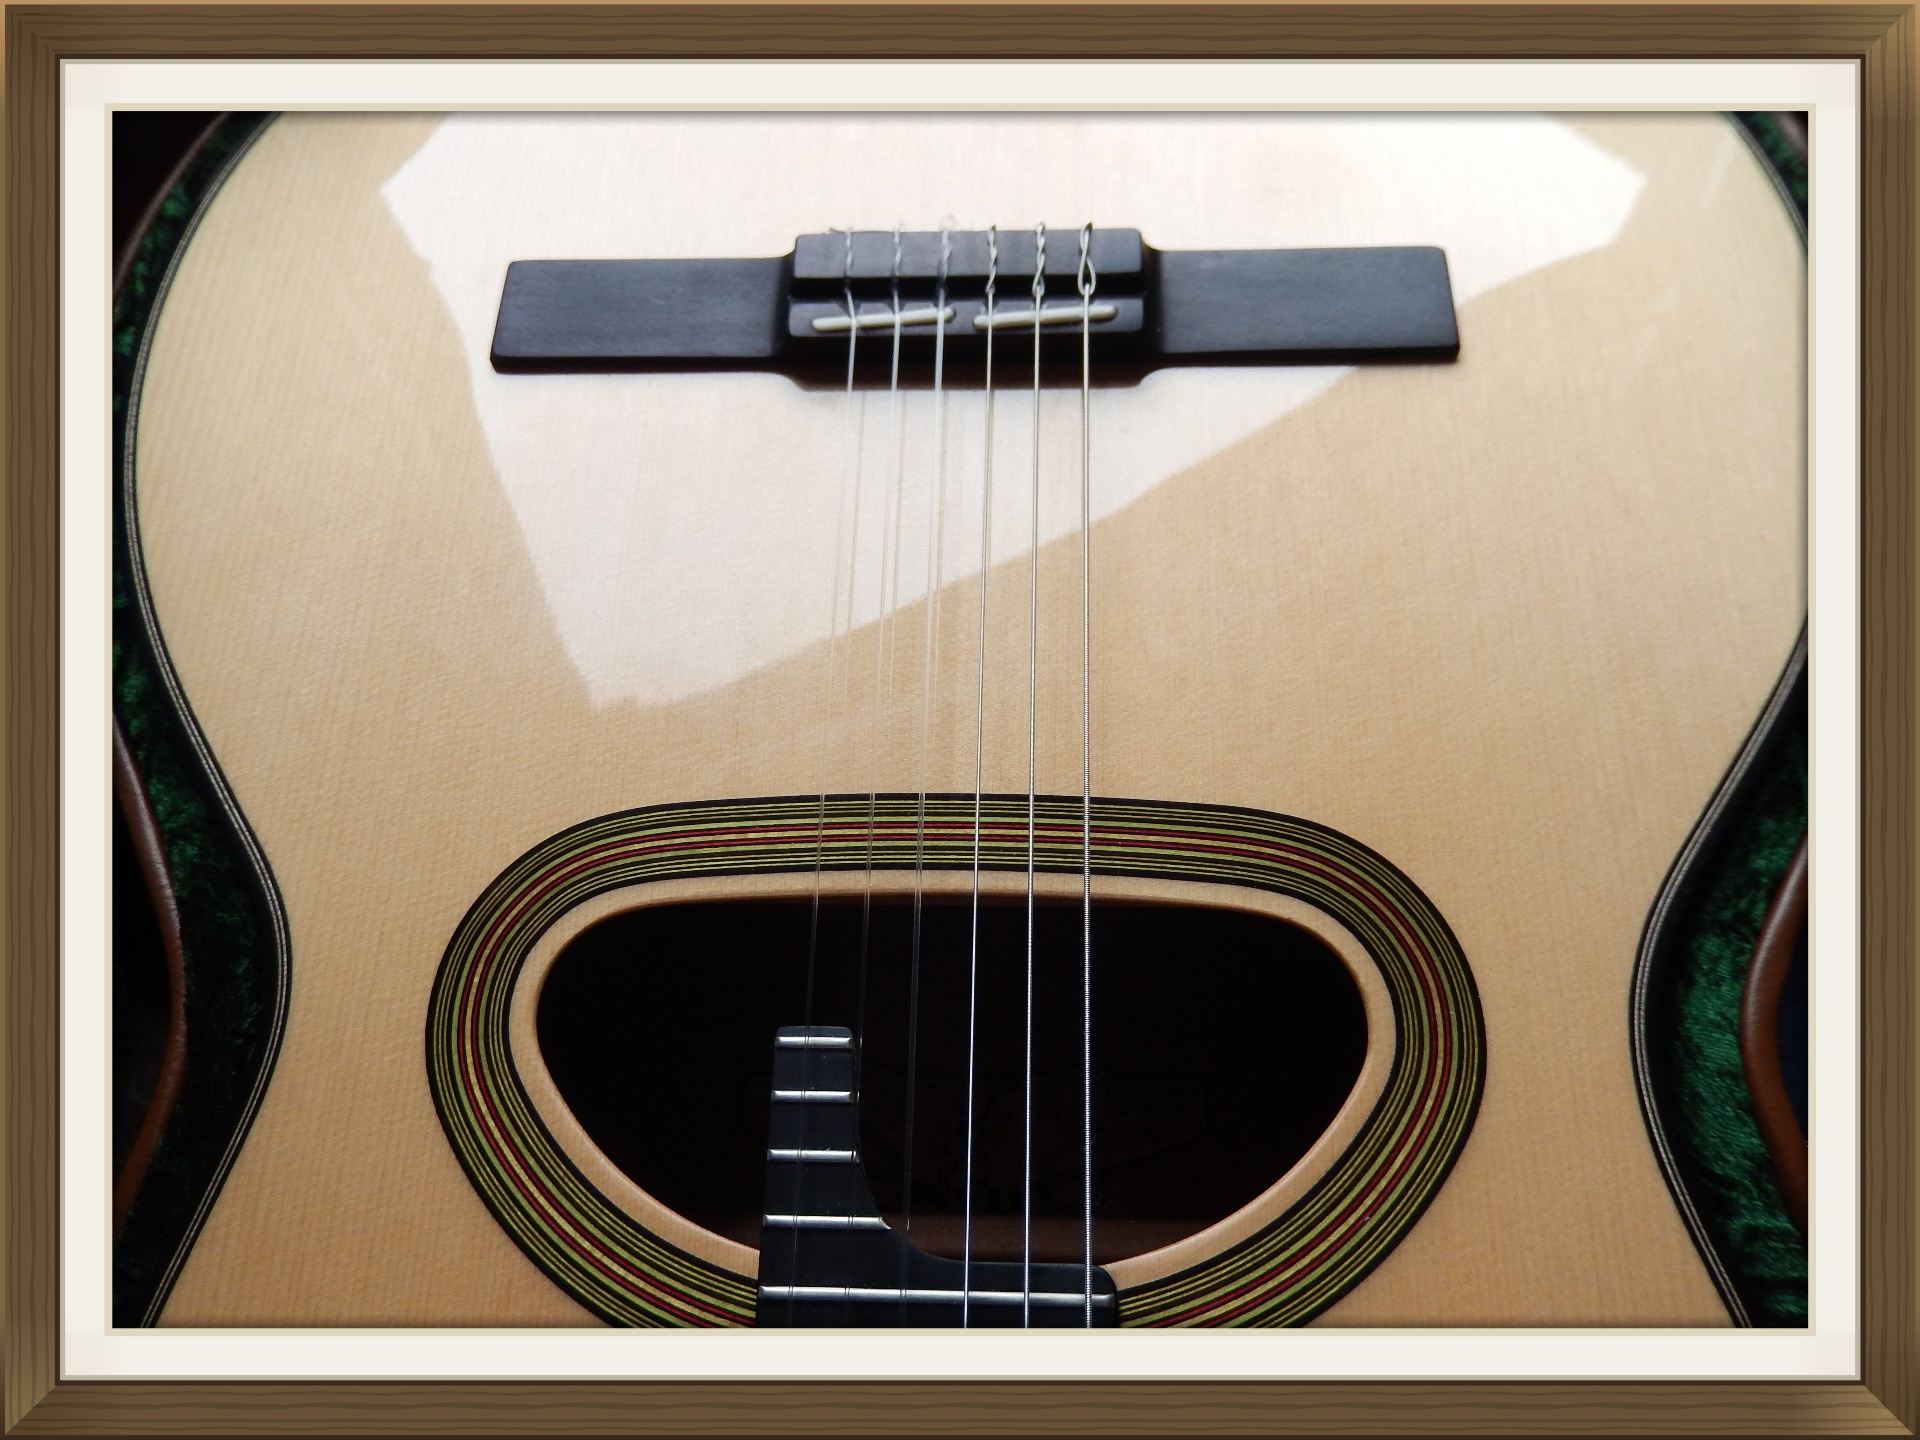 MannofieldMusic - Guitar Lessons in Surbiton, Kingston upon Thames, Greater London